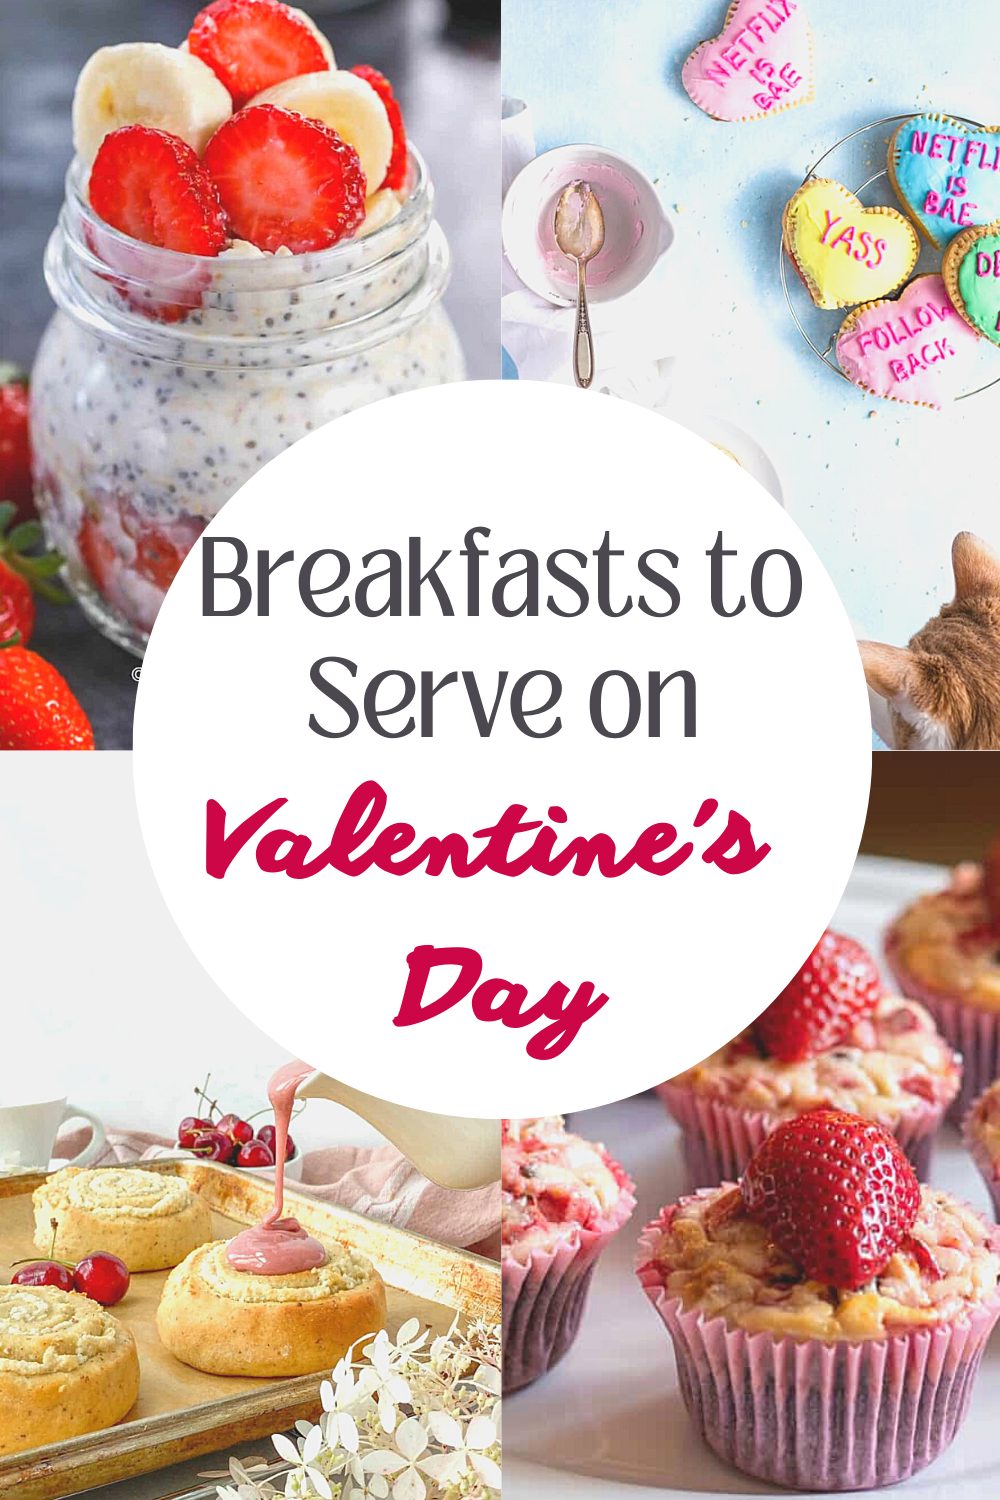 Show your loved ones some extra love this Valentine's Day with a delicious breakfast. These recipes are sure to please, whether you're looking for something sweet or savory. From Strawberry Cheesecake Muffins and Bacon Cinnamon Rolls to XOXO Pancakes and Conversation Heart Pop Tarts, there's something here for everyone! via @mymommystyle